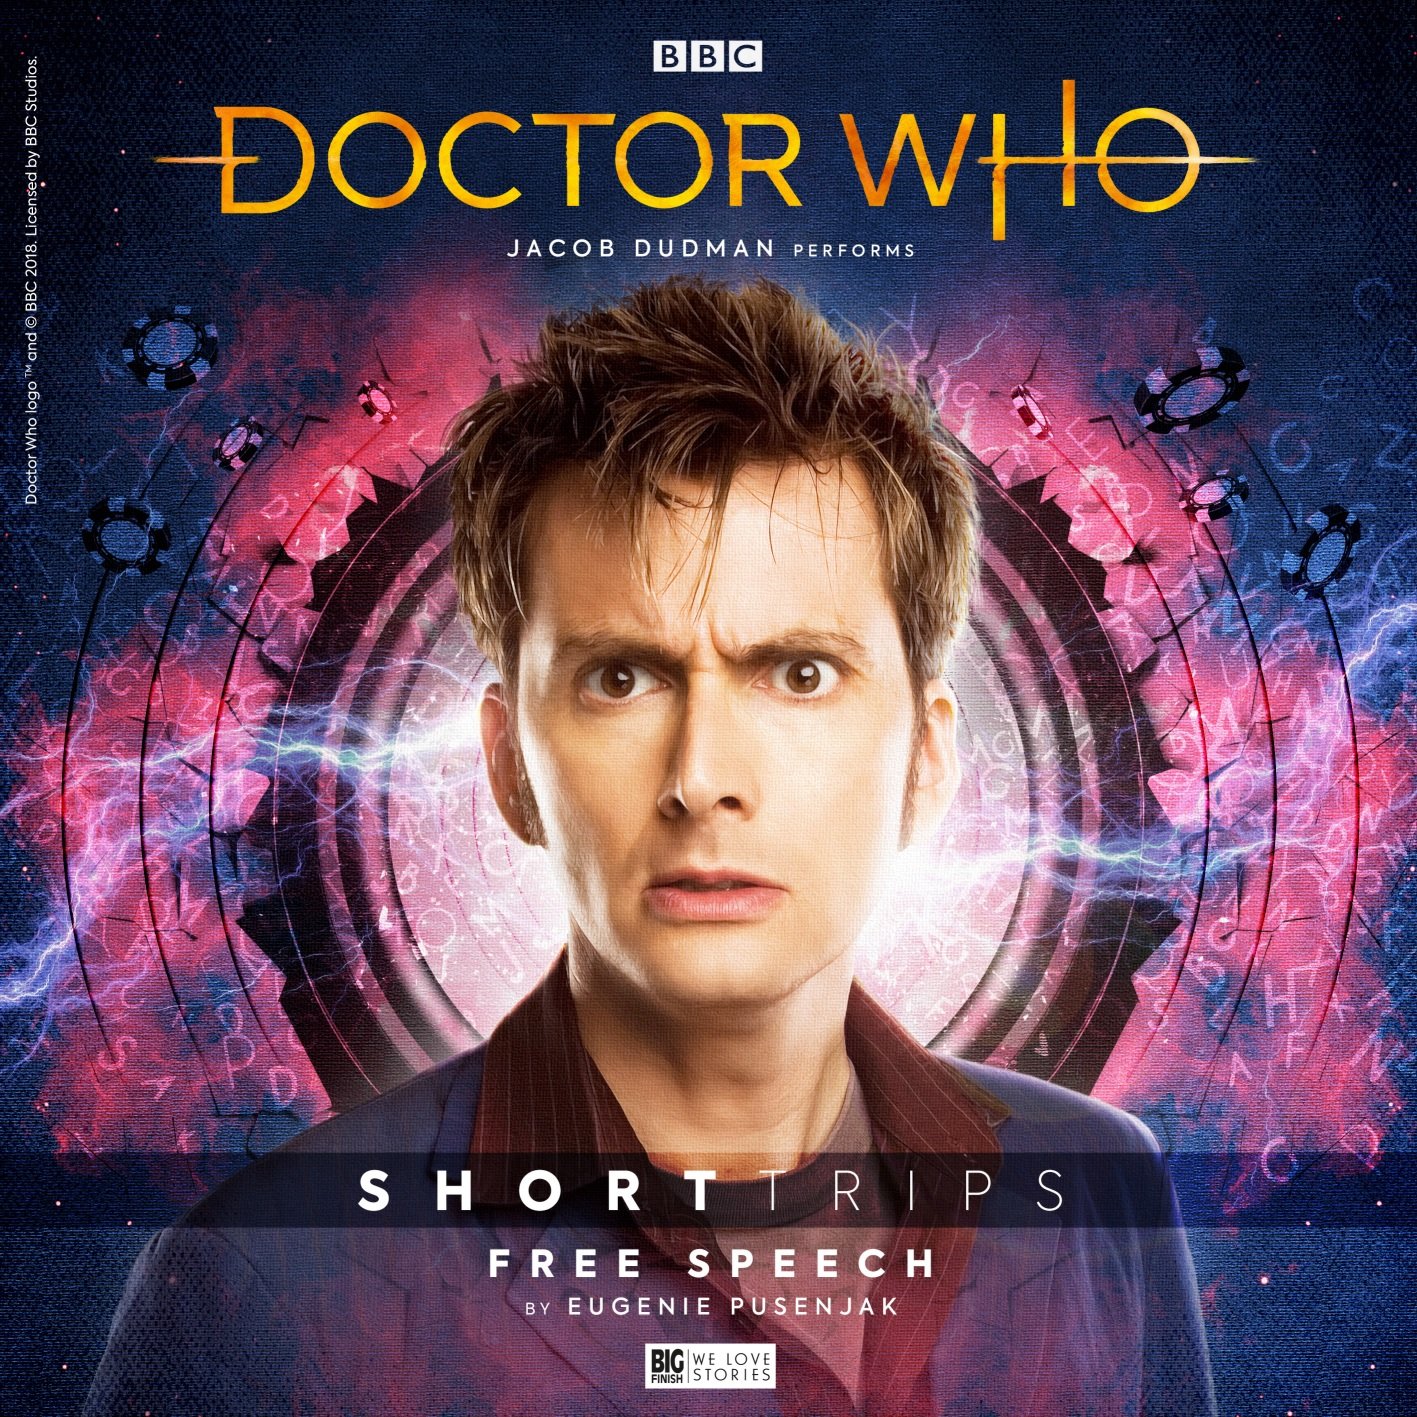 Reviewed: Big Finish’s Doctor Who Short Trips – Free Speech